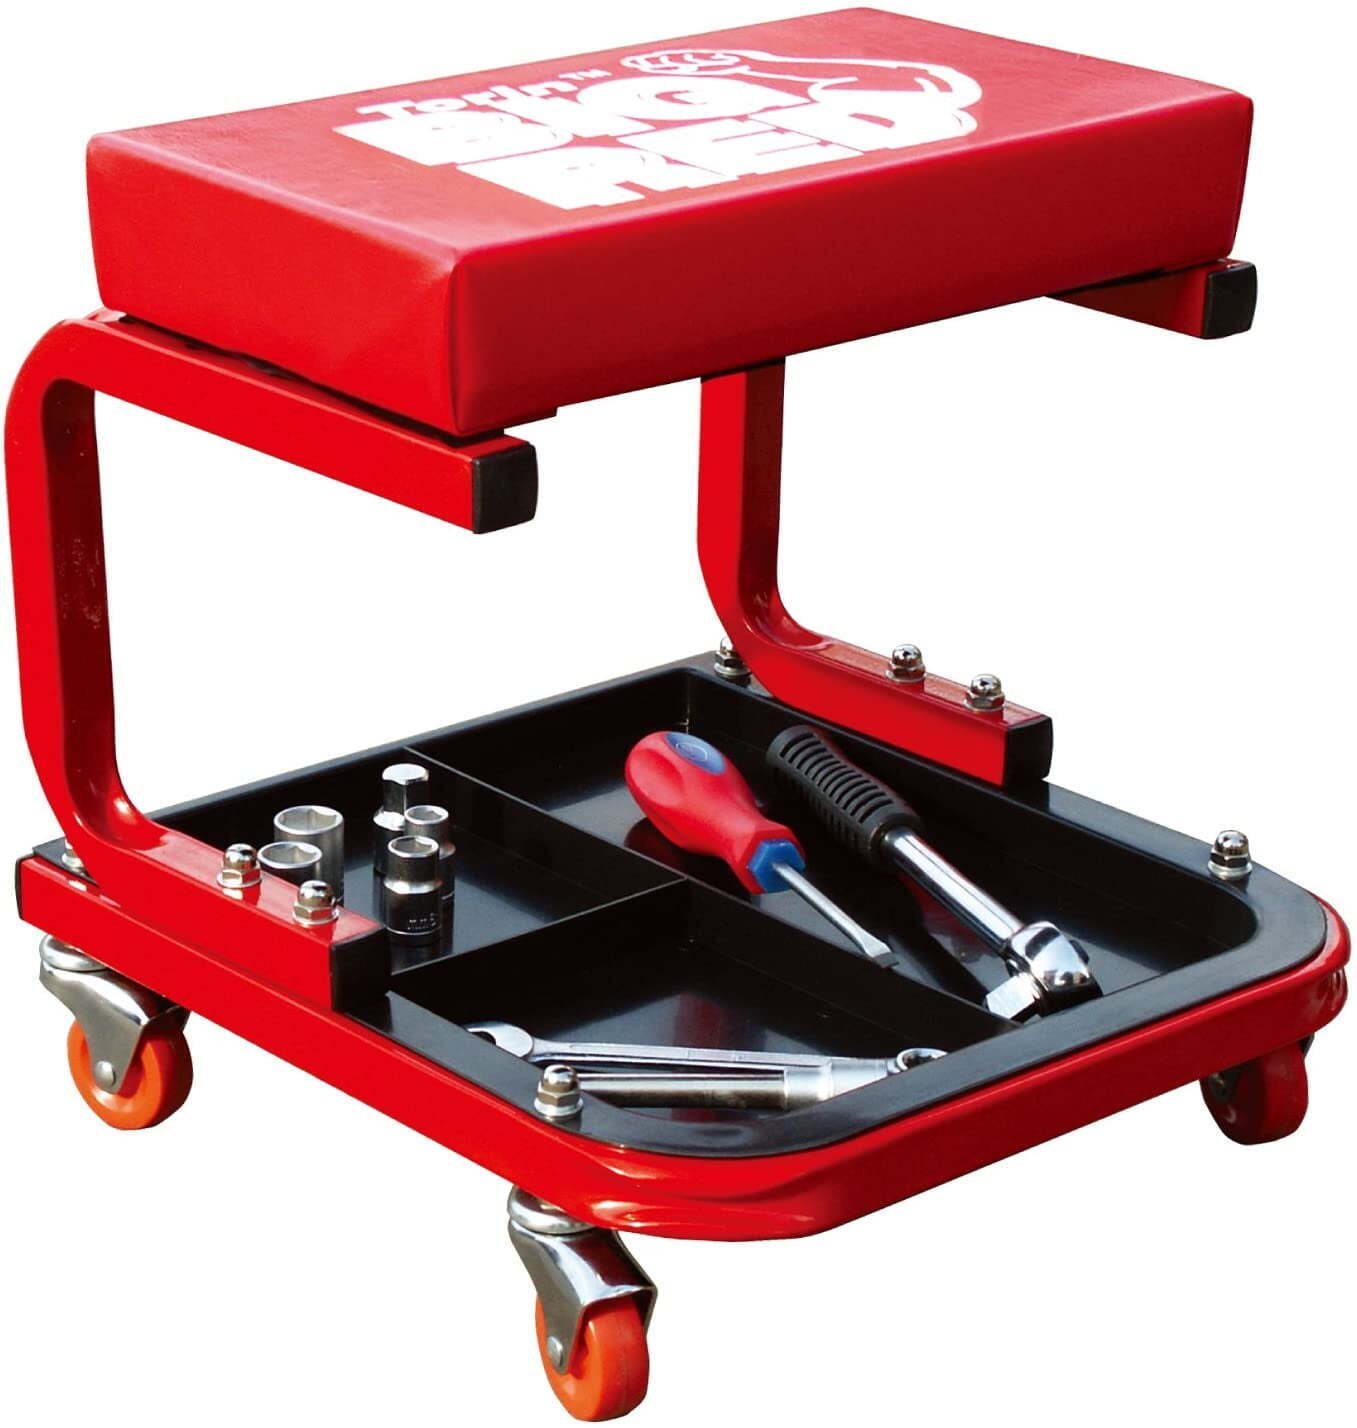 Red DTR6300 Rolling Garage/Shop Creeper Seat